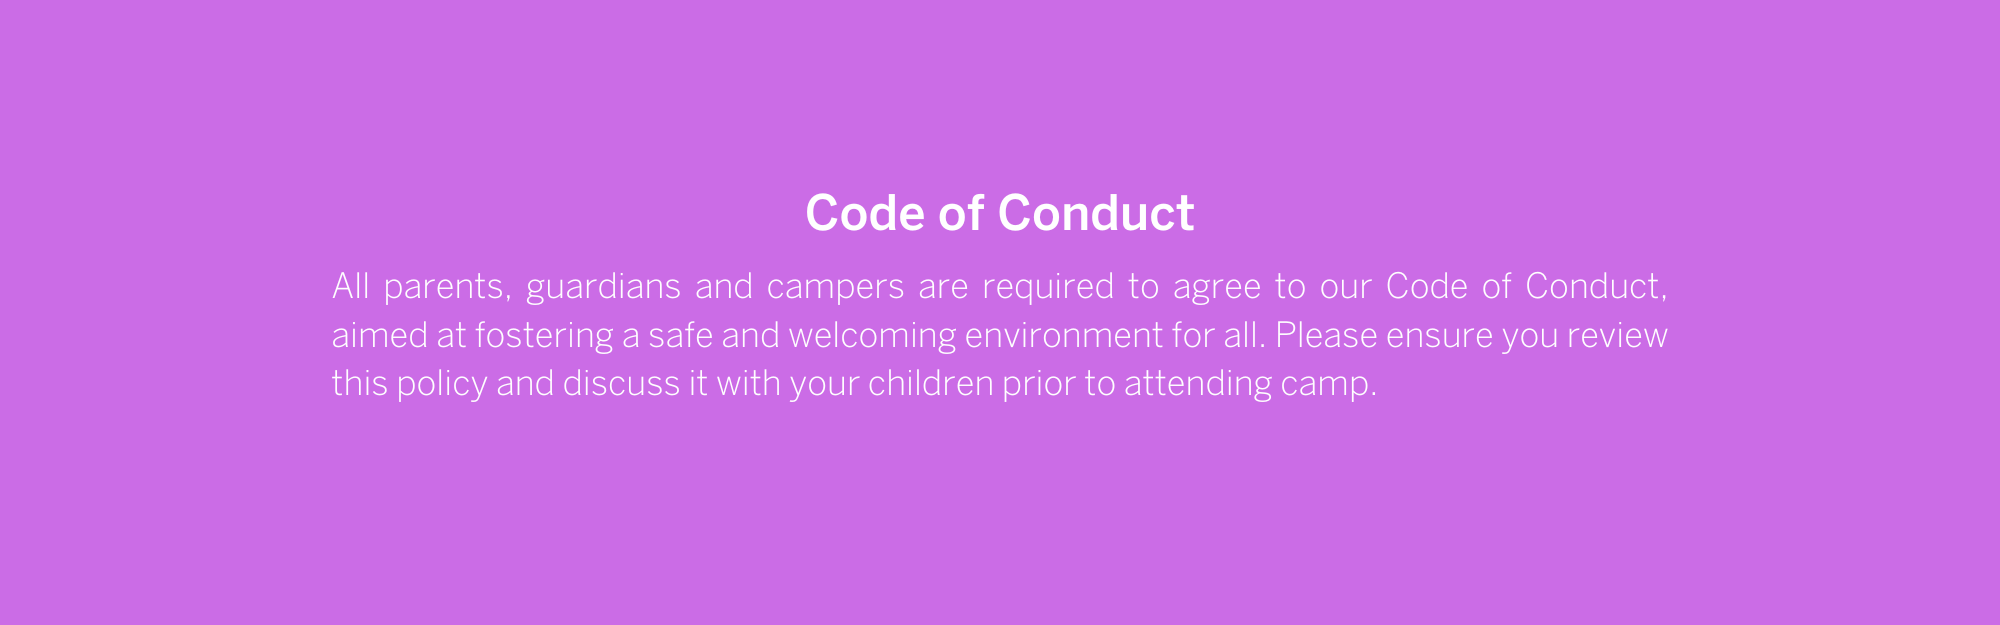 Code of Conduct - link to full code of conduct